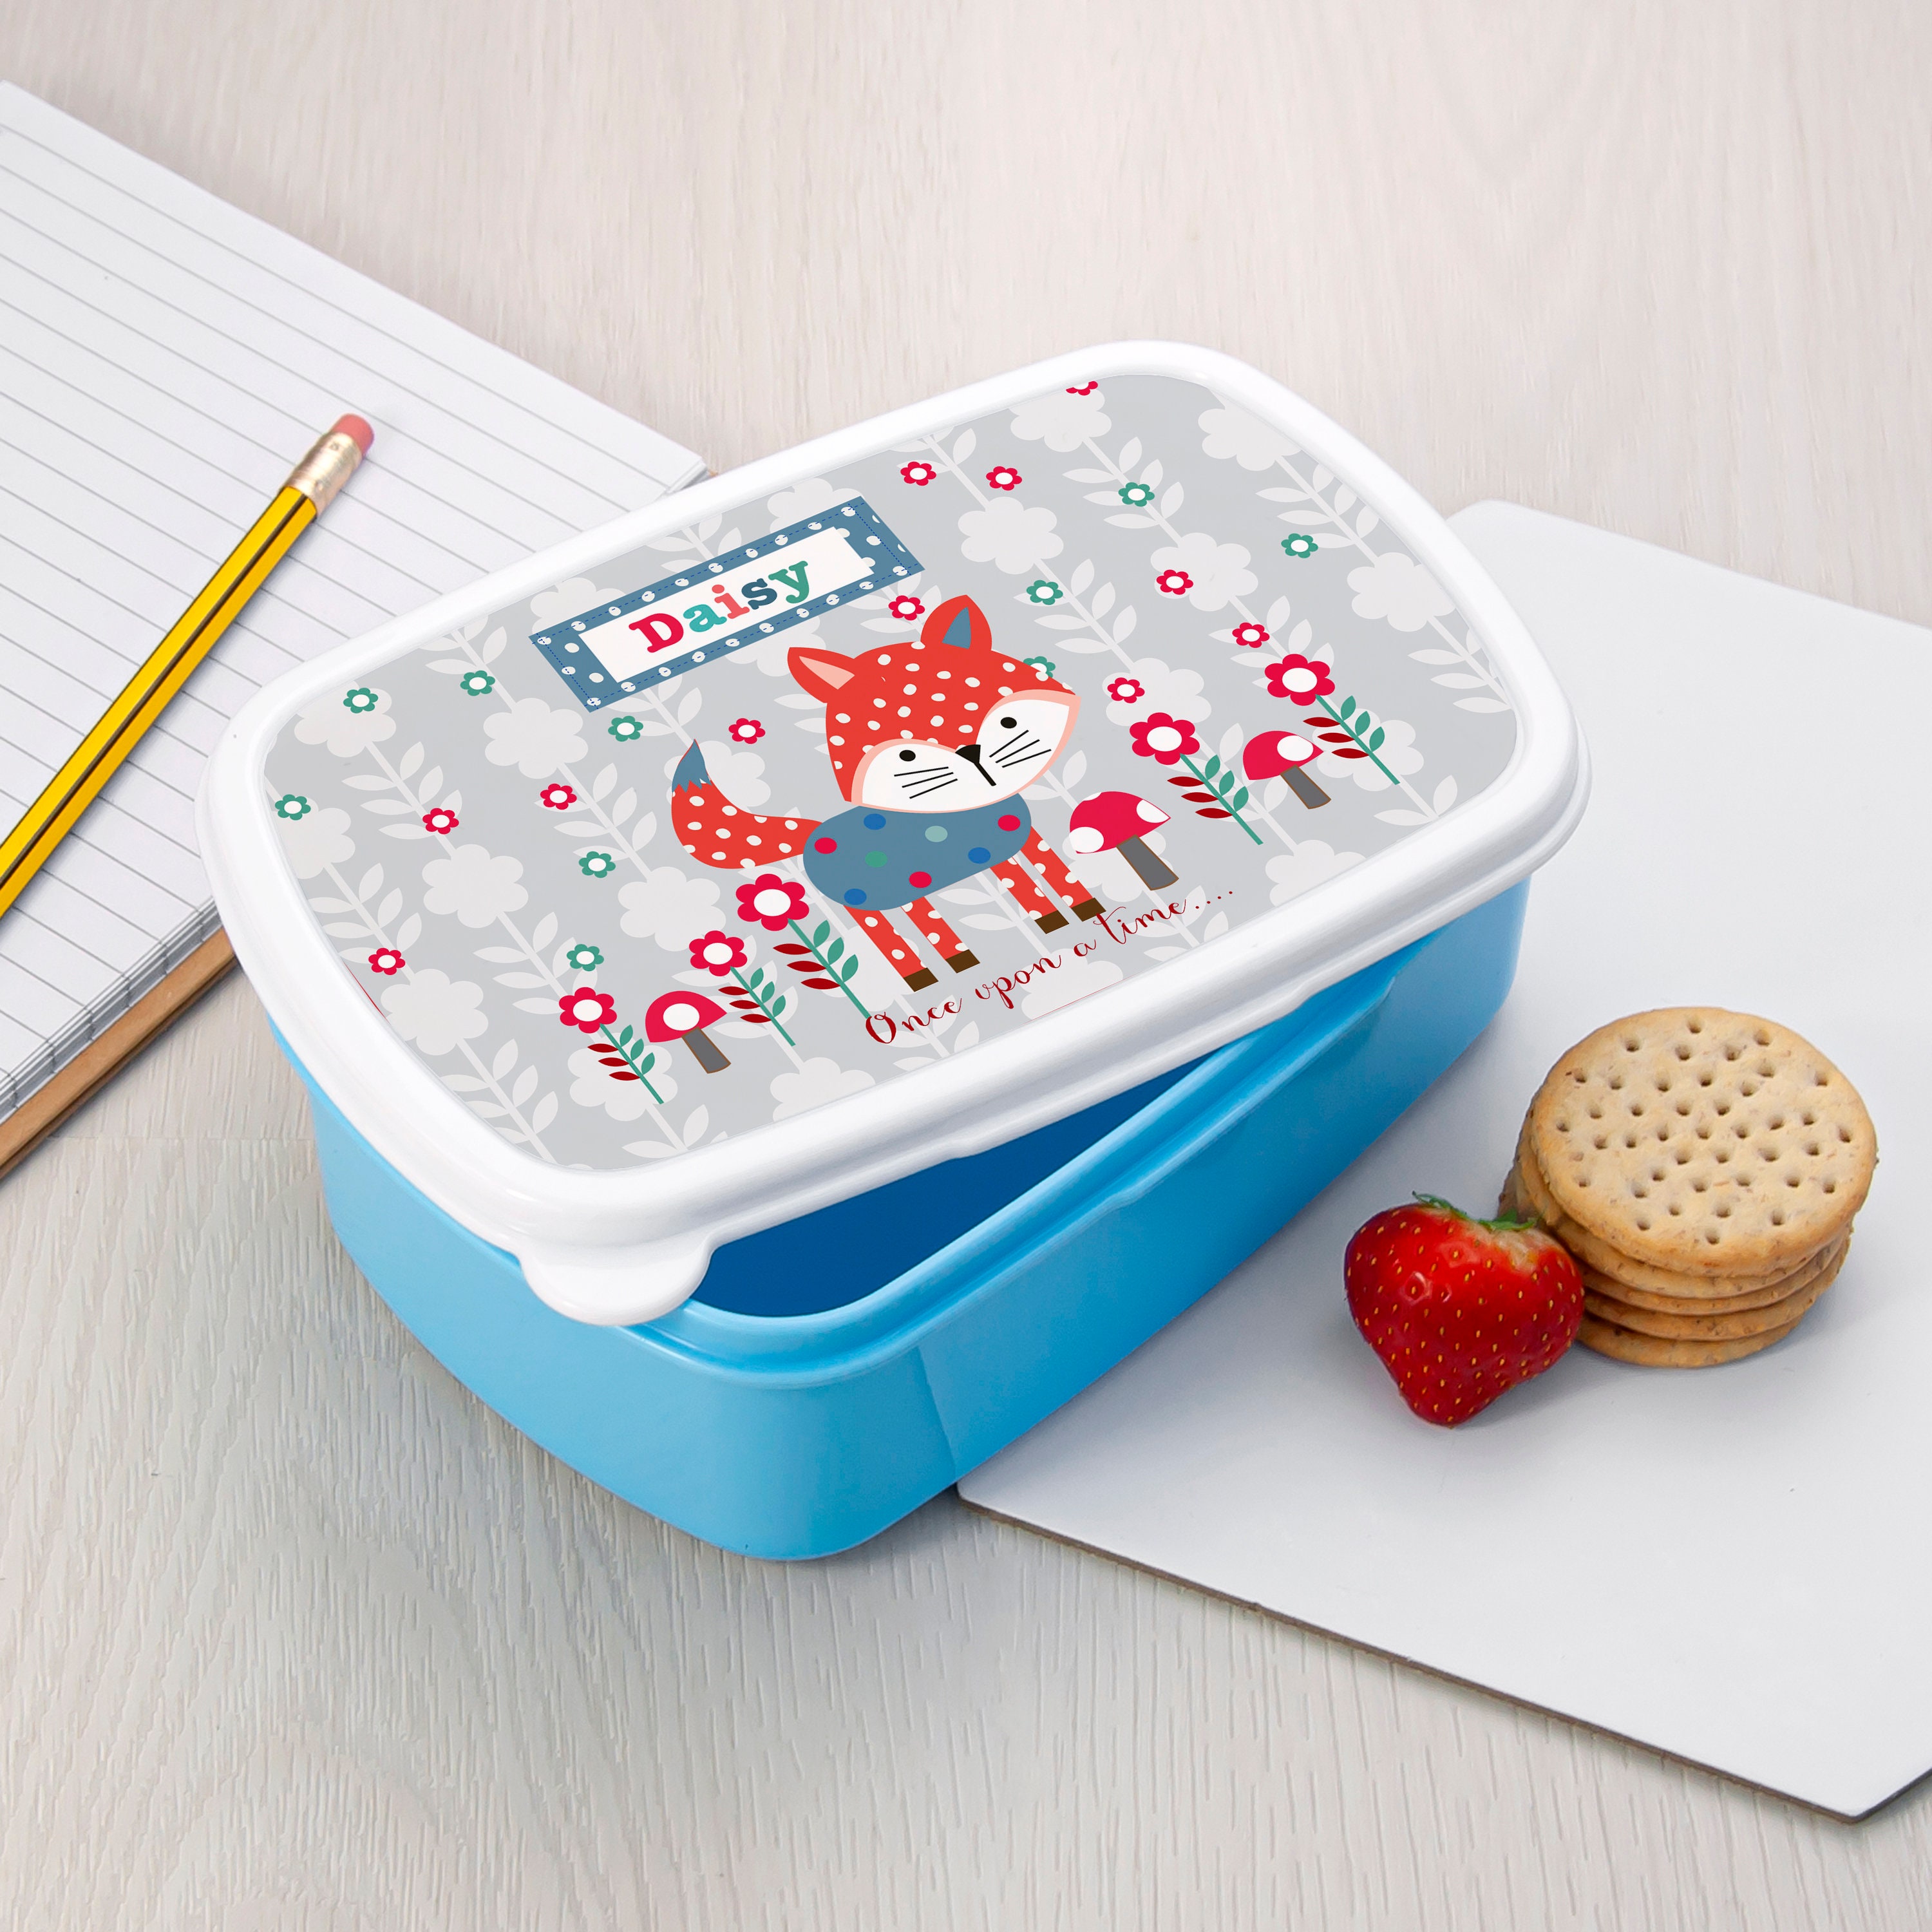 Portable Insulated Lunch Container With Bag, Kawaii Panda Thermal Lunch Box Bento  Box, Insulated Food Container With Handle, Stackable Stainless Steel Food  Container, Kitchen Supplies For Teenagers And Workers At School,canteen 